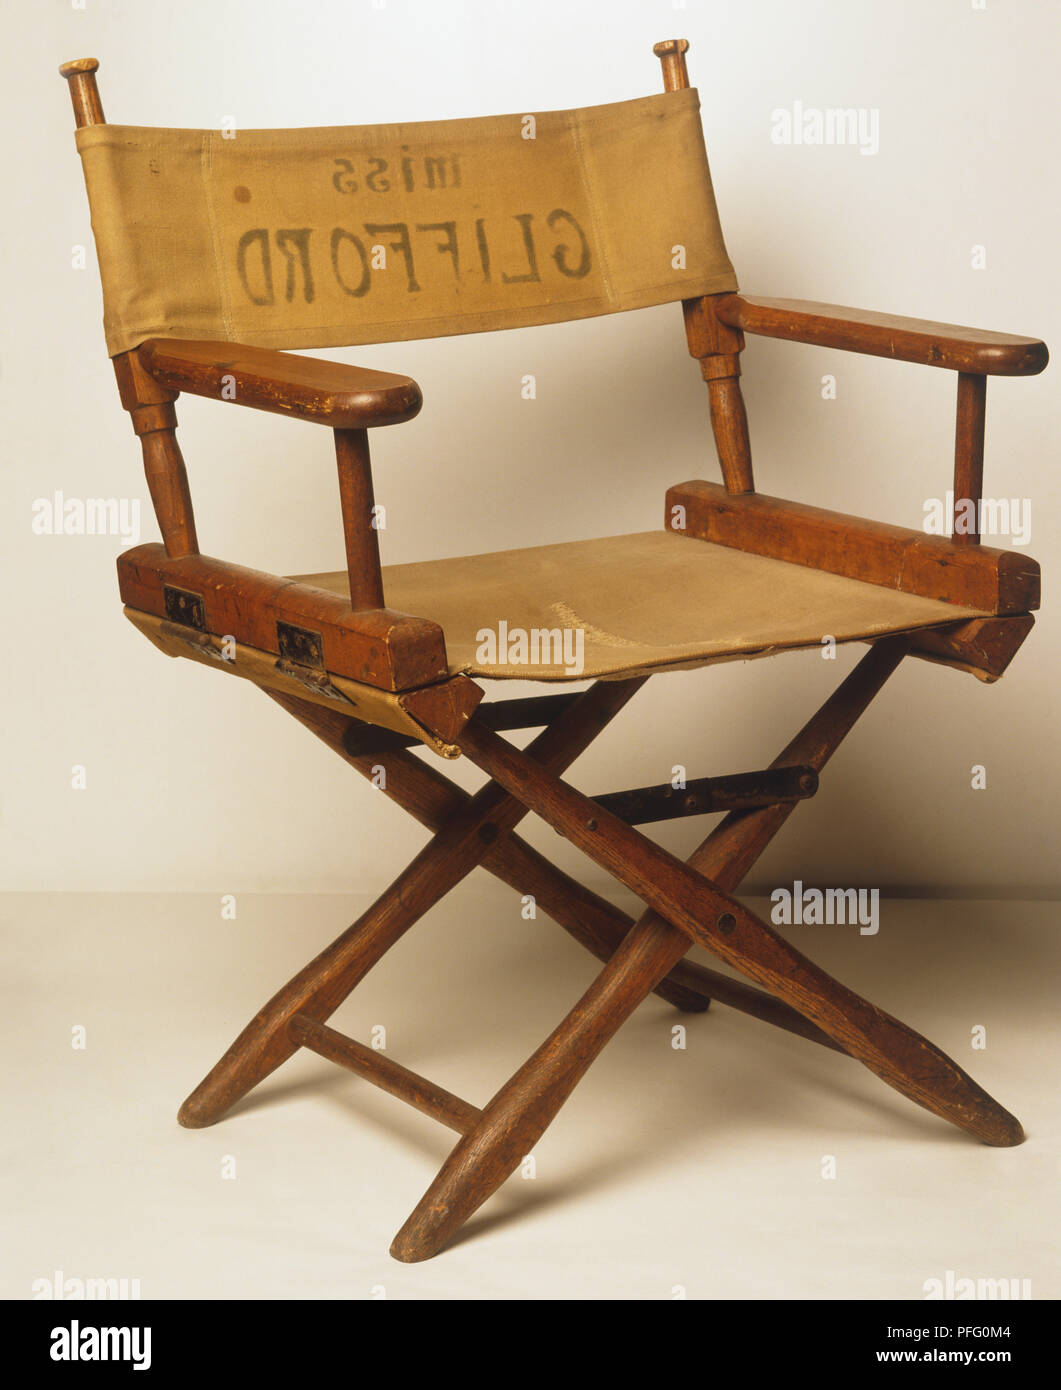 Old fashioned director's chair Stock Photo